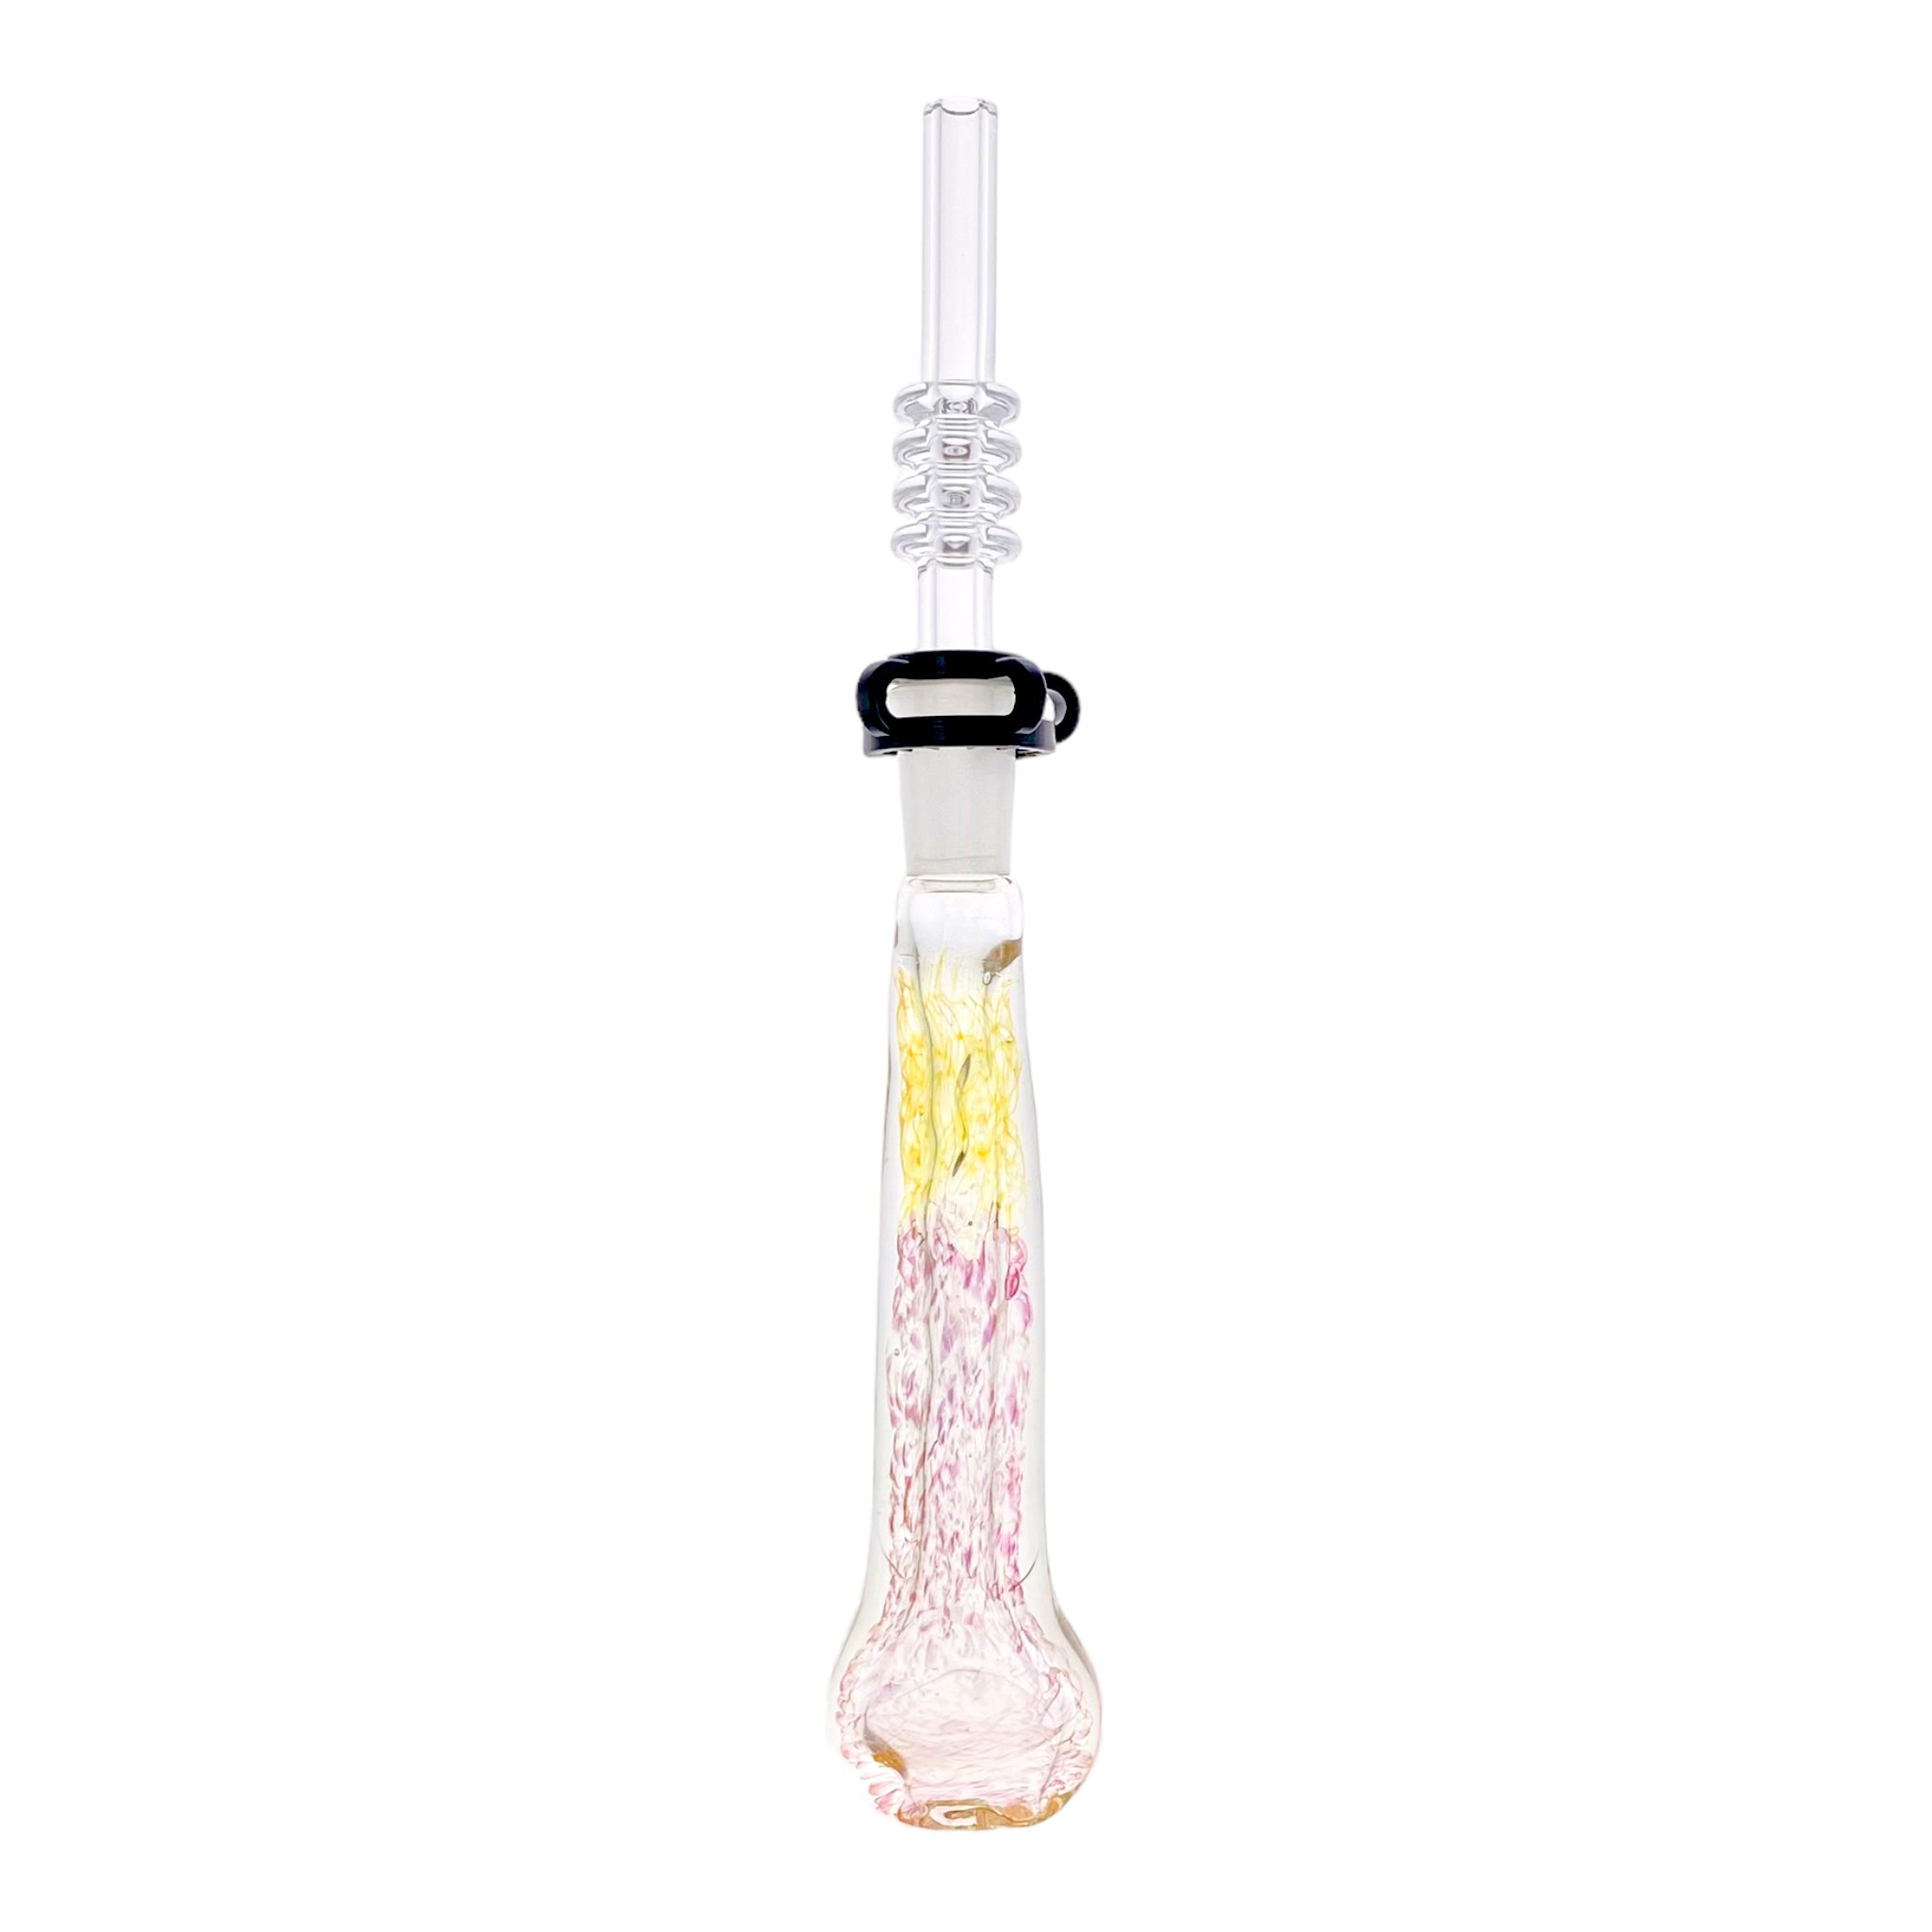 10mm Nectar Collector - Color Changing Fuming Inside Out With 10mm Quartz Tip